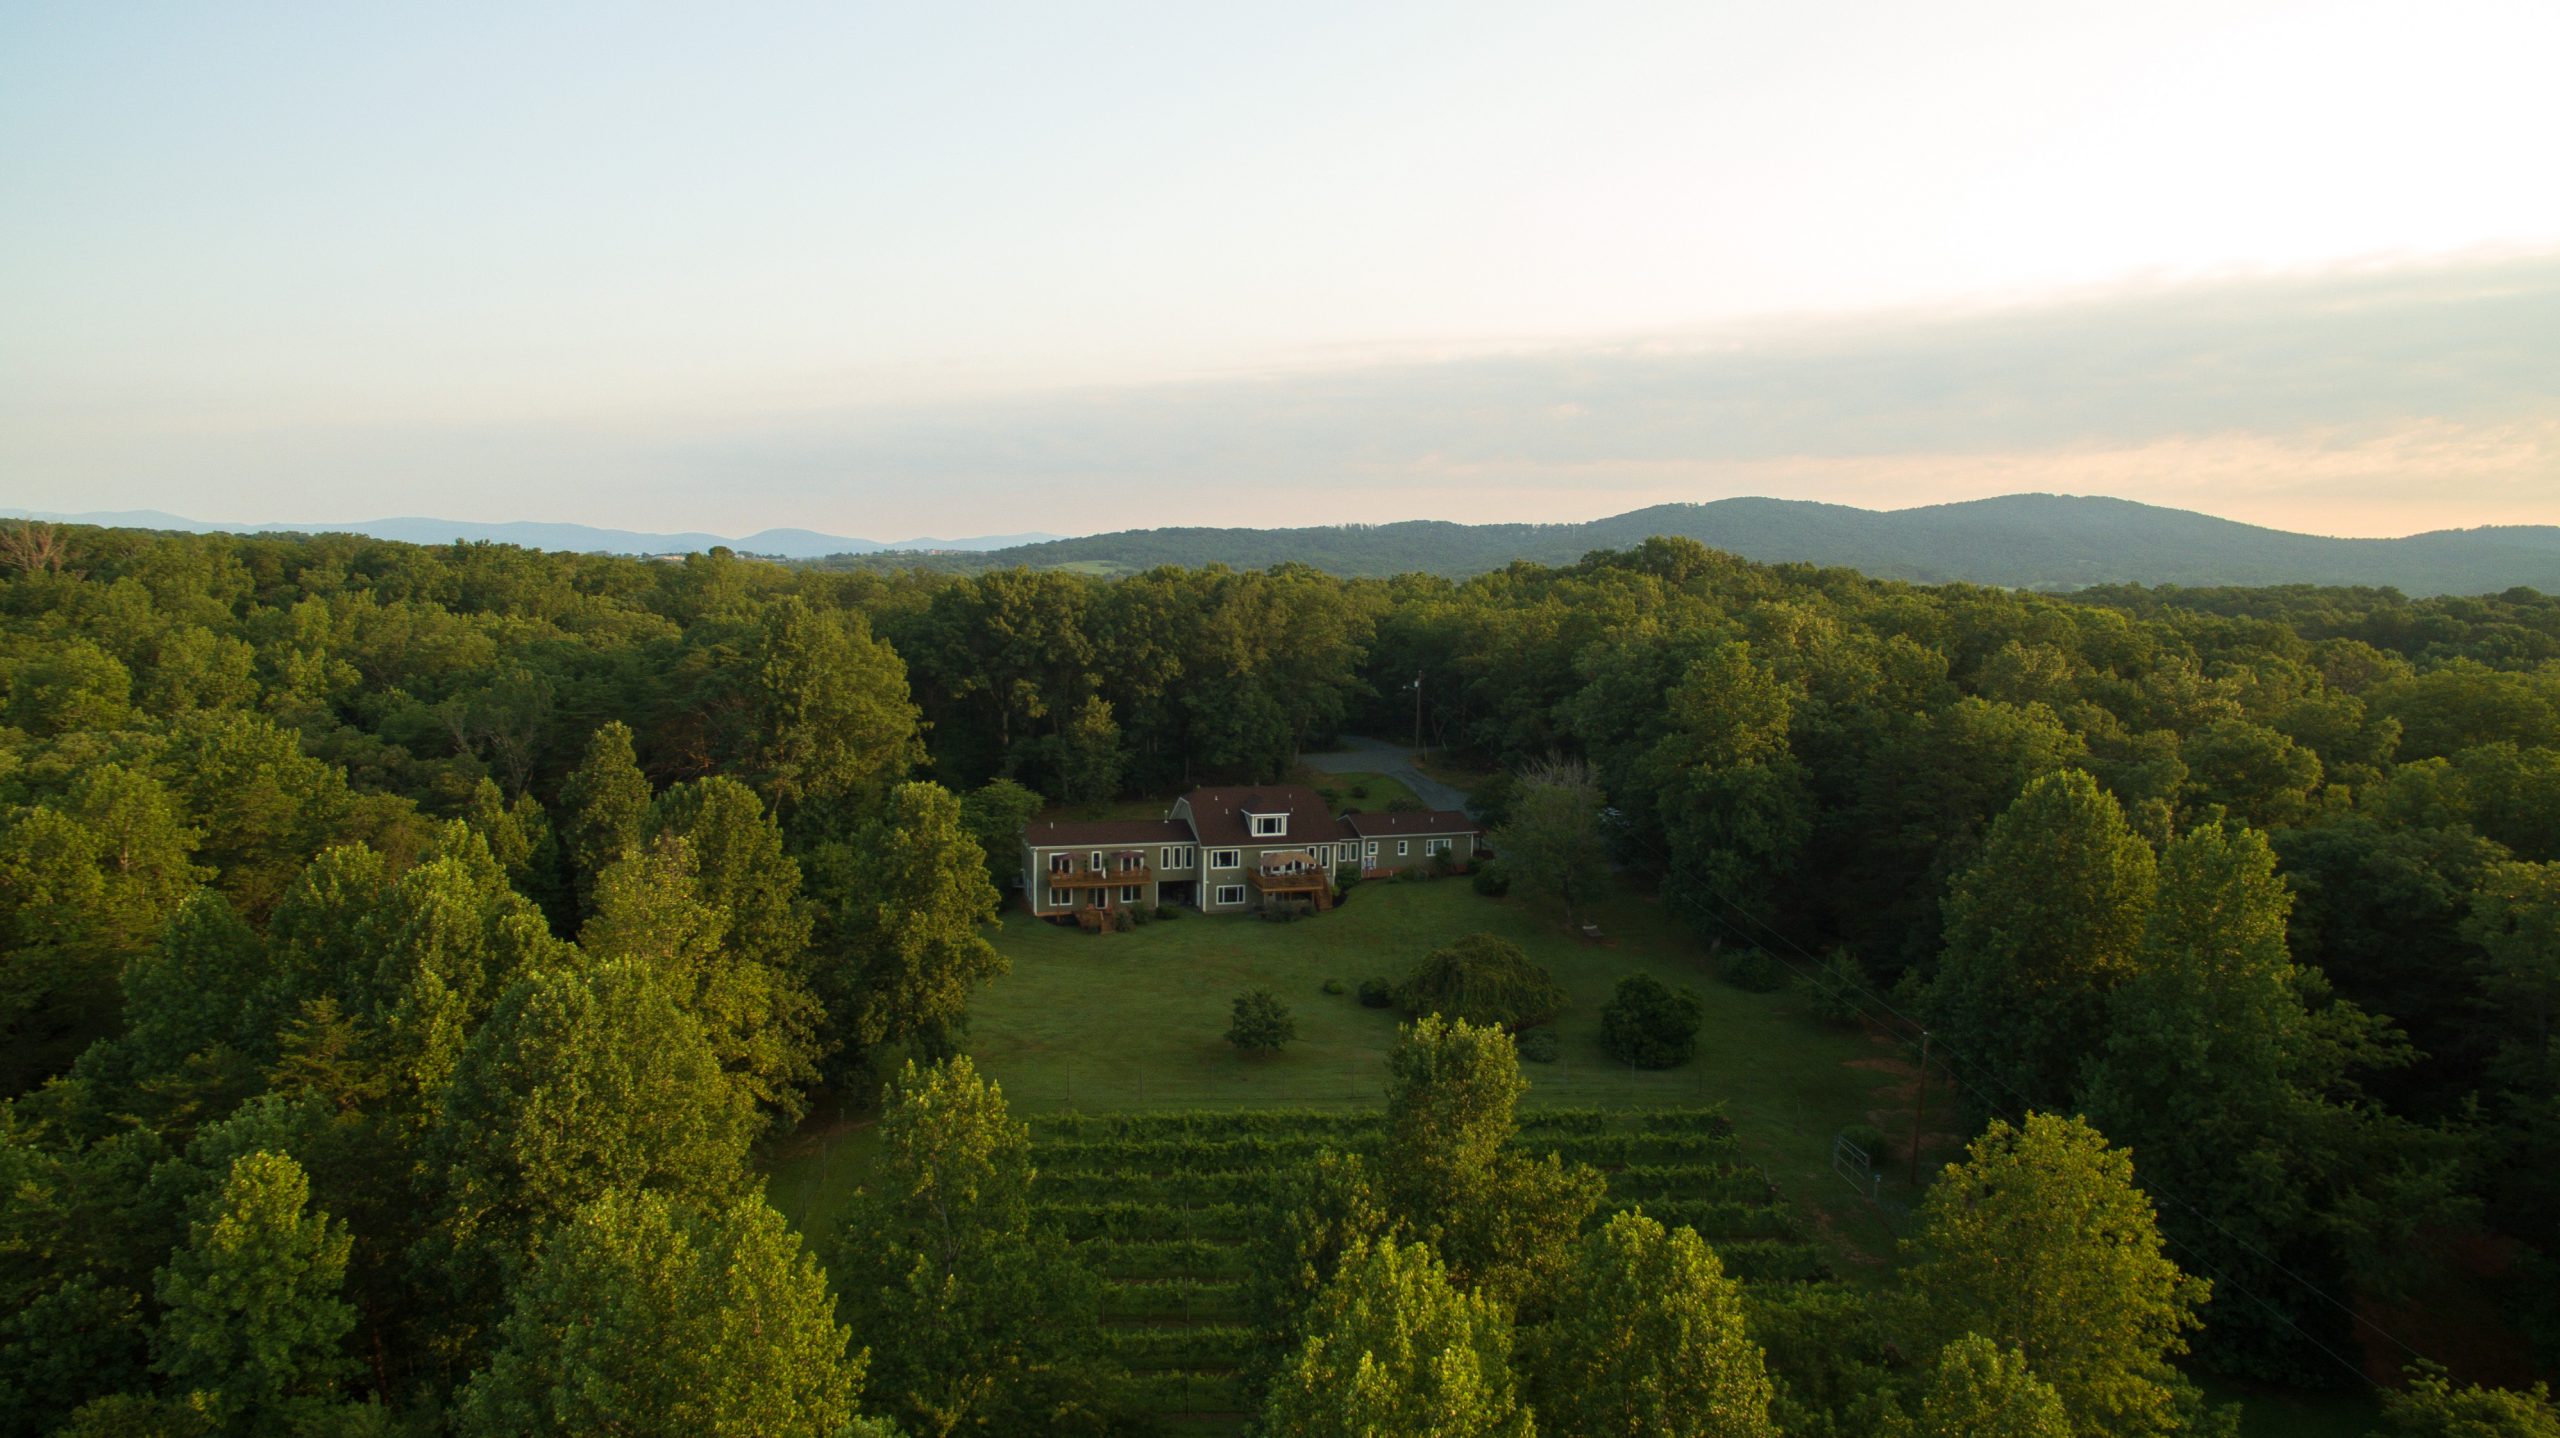 Aerial view of B&B surrounded by a lush green lawn, hundreds of green trees, and distant mountains